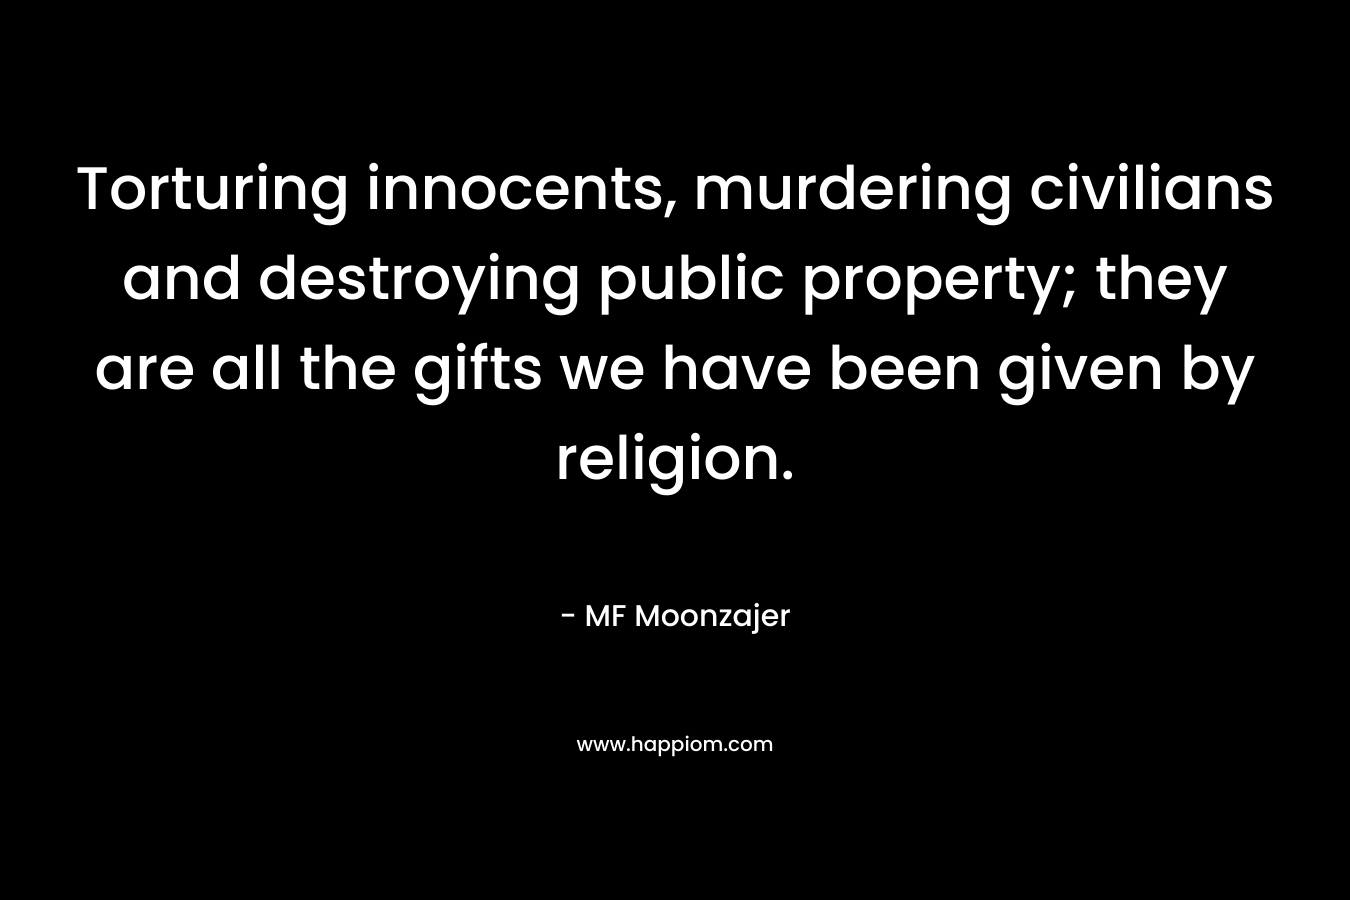 Torturing innocents, murdering civilians and destroying public property; they are all the gifts we have been given by religion. – MF Moonzajer